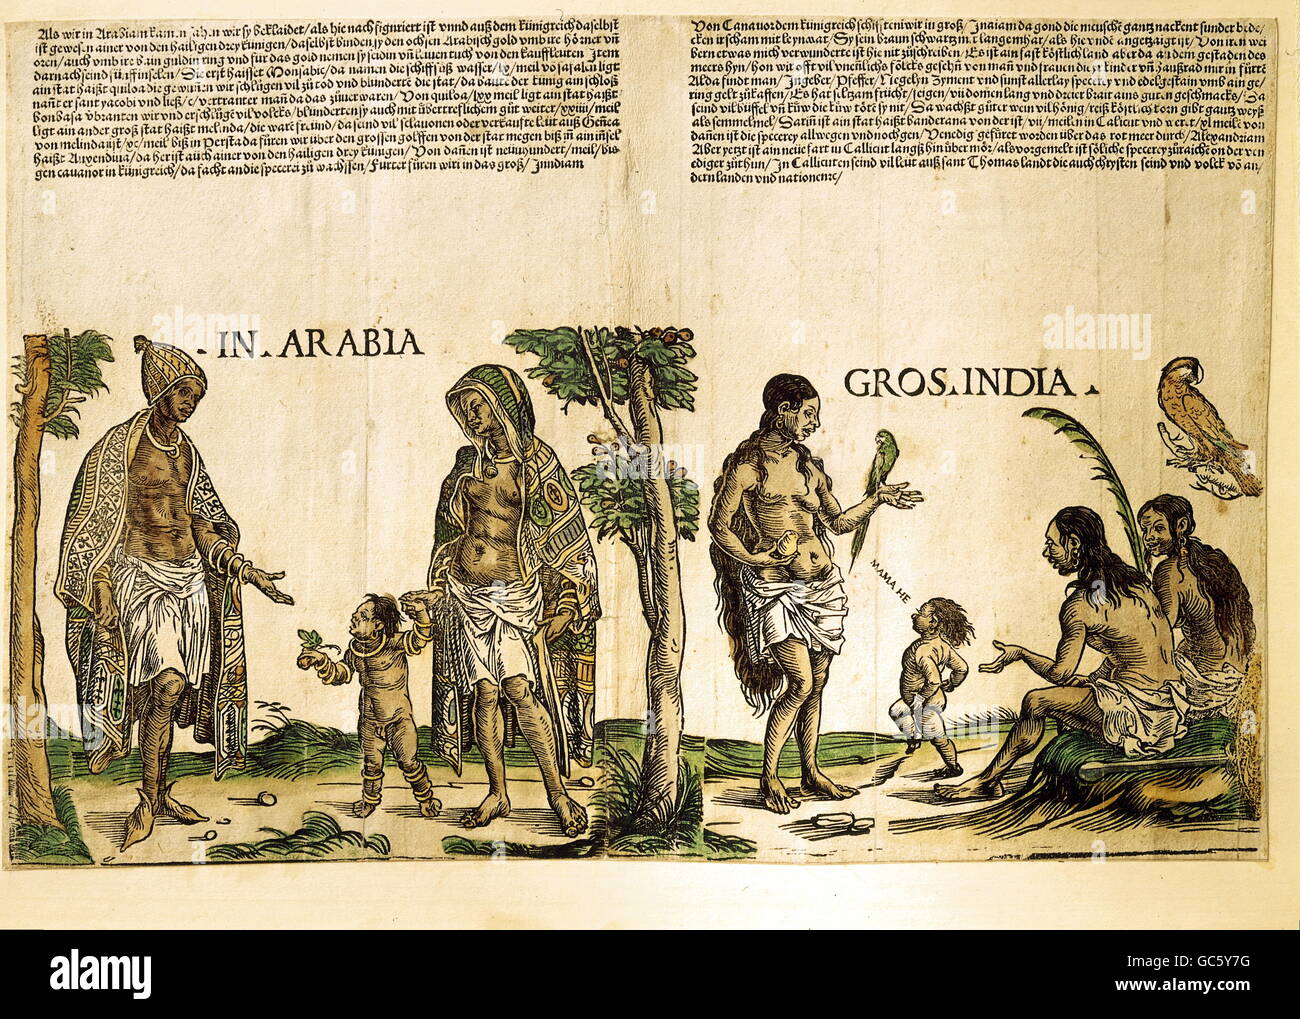 people, ethnics, Asia, Arabia and India, woodcut by Hans Burgkmair the Elder (1473 - 1531), Welser chronicle, Venezuela expedition, sheet 2, Additional-Rights-Clearences-Not Available Stock Photo